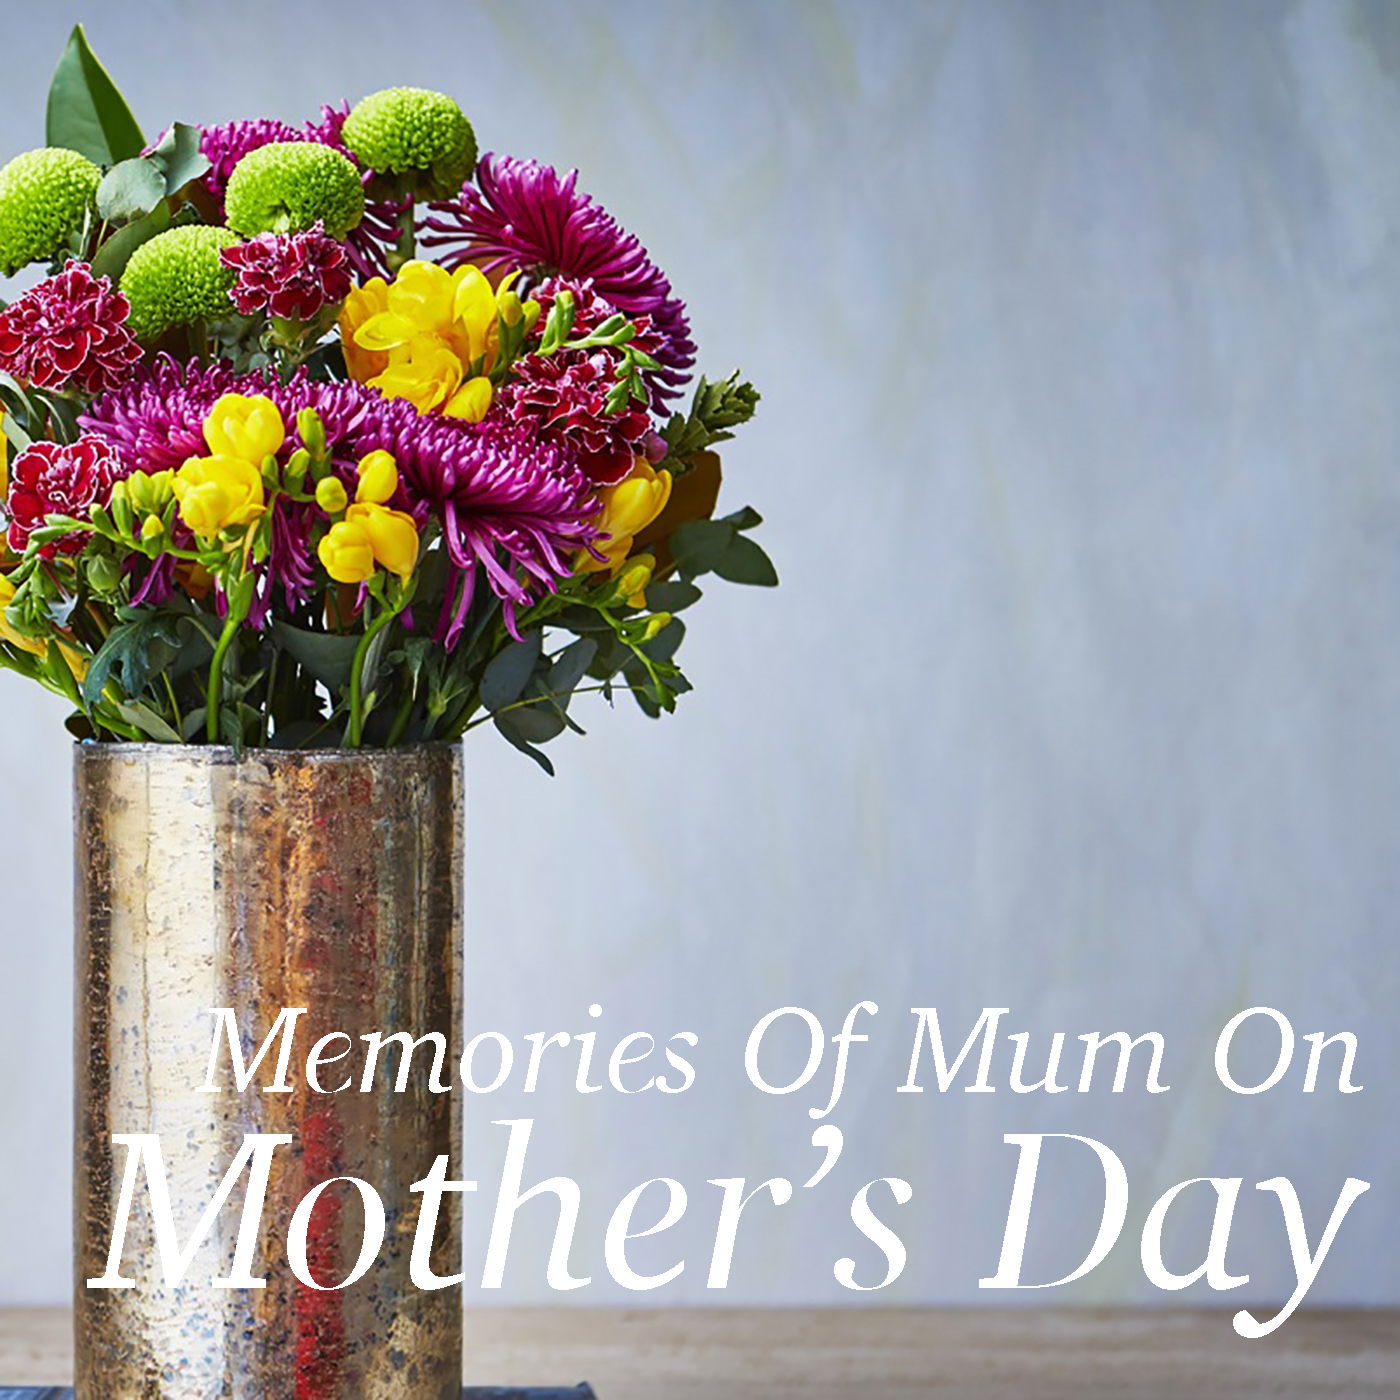 Memories Of Mum On Mother's Day